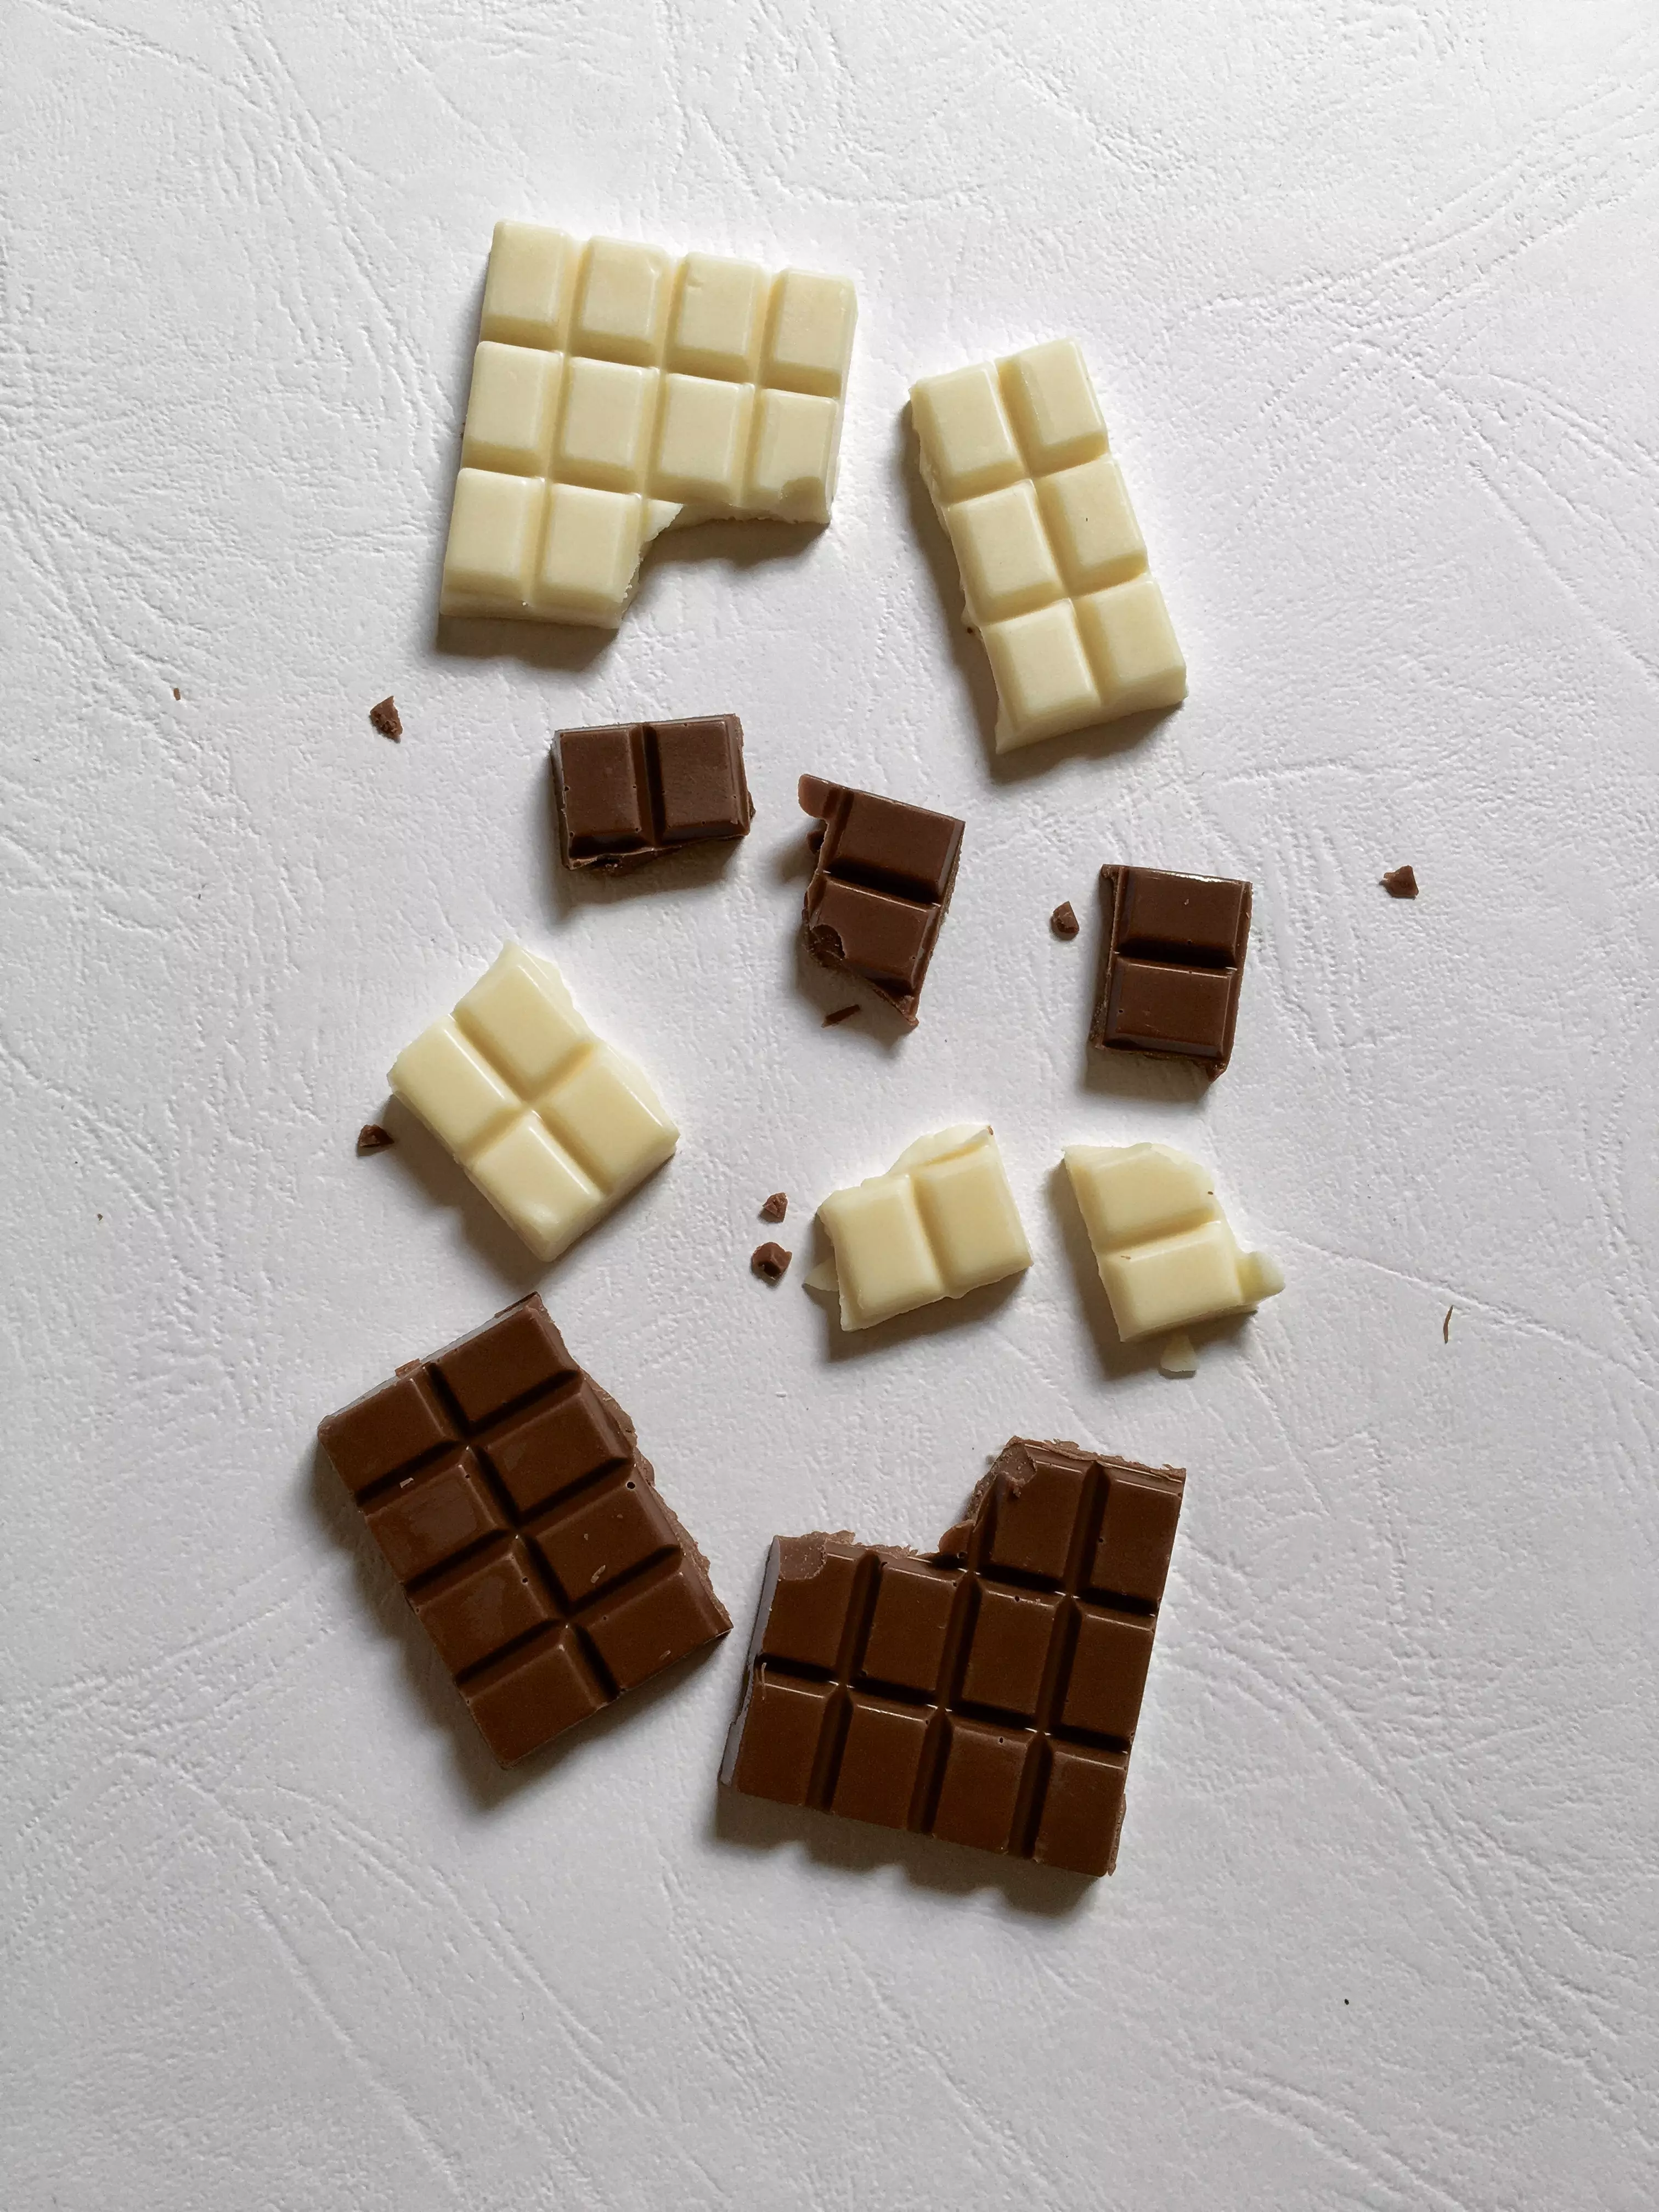 The pack features milk and white chocolate, among others (